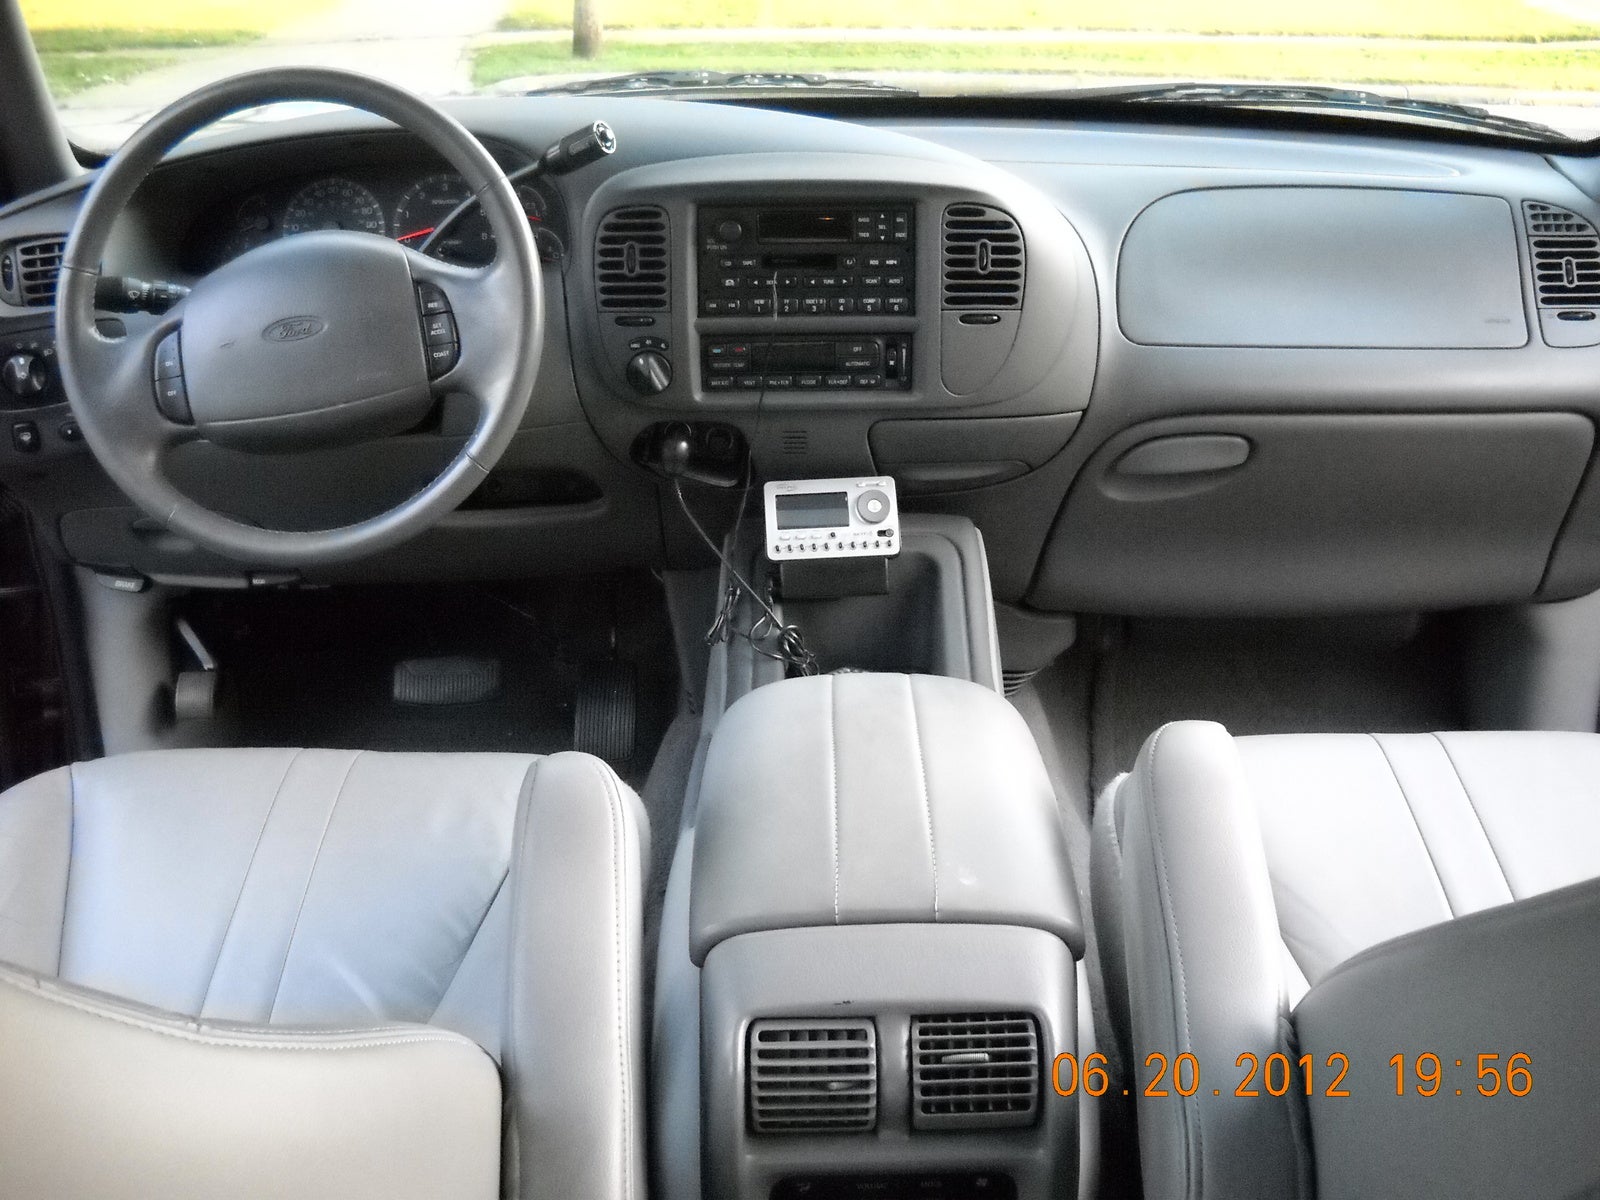 1999 Ford expedition interior #8